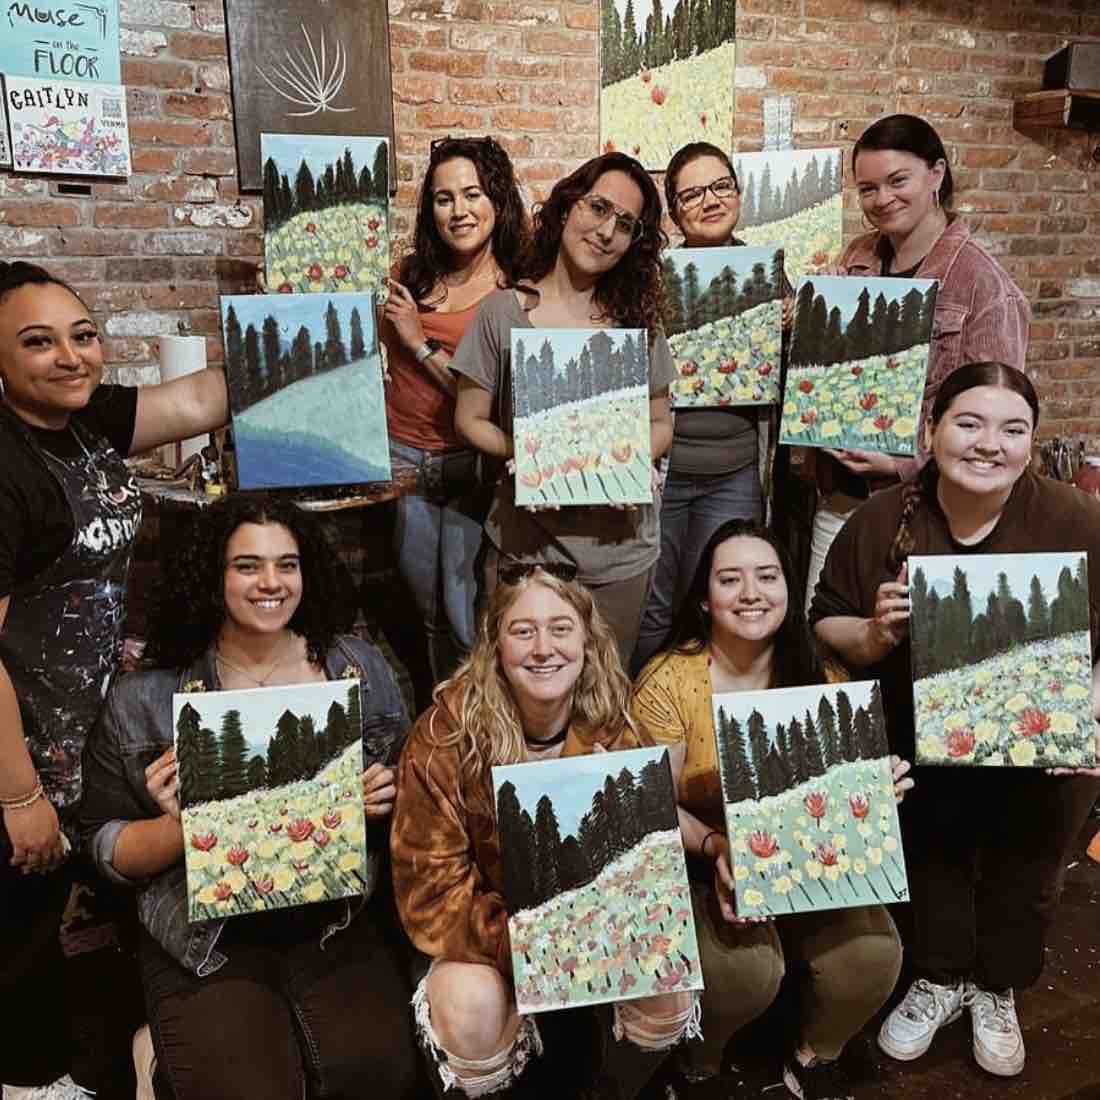 Oh, yes, it’s ladies night 💃 and the feeling’s right!

📸: @destiney.aliejah  

#musepaintbar #paintandsip #paintbar #findyourmuse #sipandpaint #sipnpaint #paintandpour #artbar #paintparty #art #paint #painting #learntopaint #artclass #girlsnight